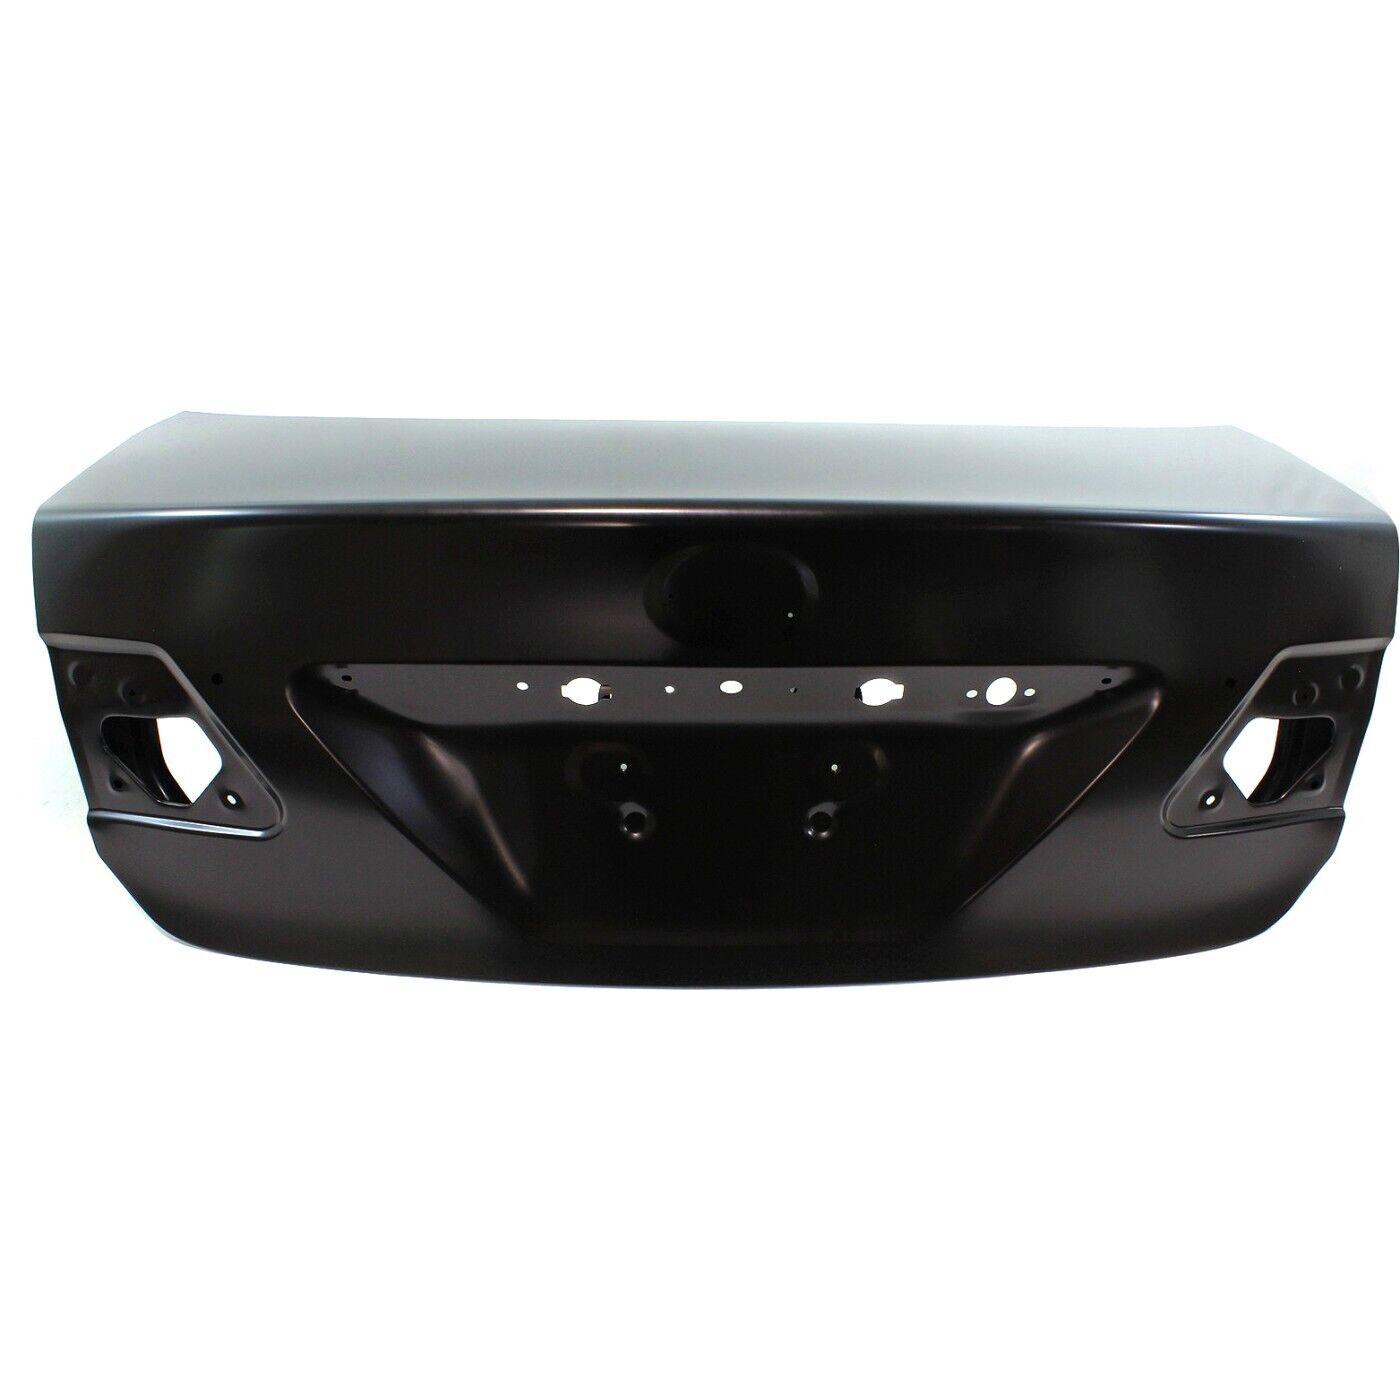 Trunk Lid For 2011-2013 Toyota Corolla North America Models with Smart Entry